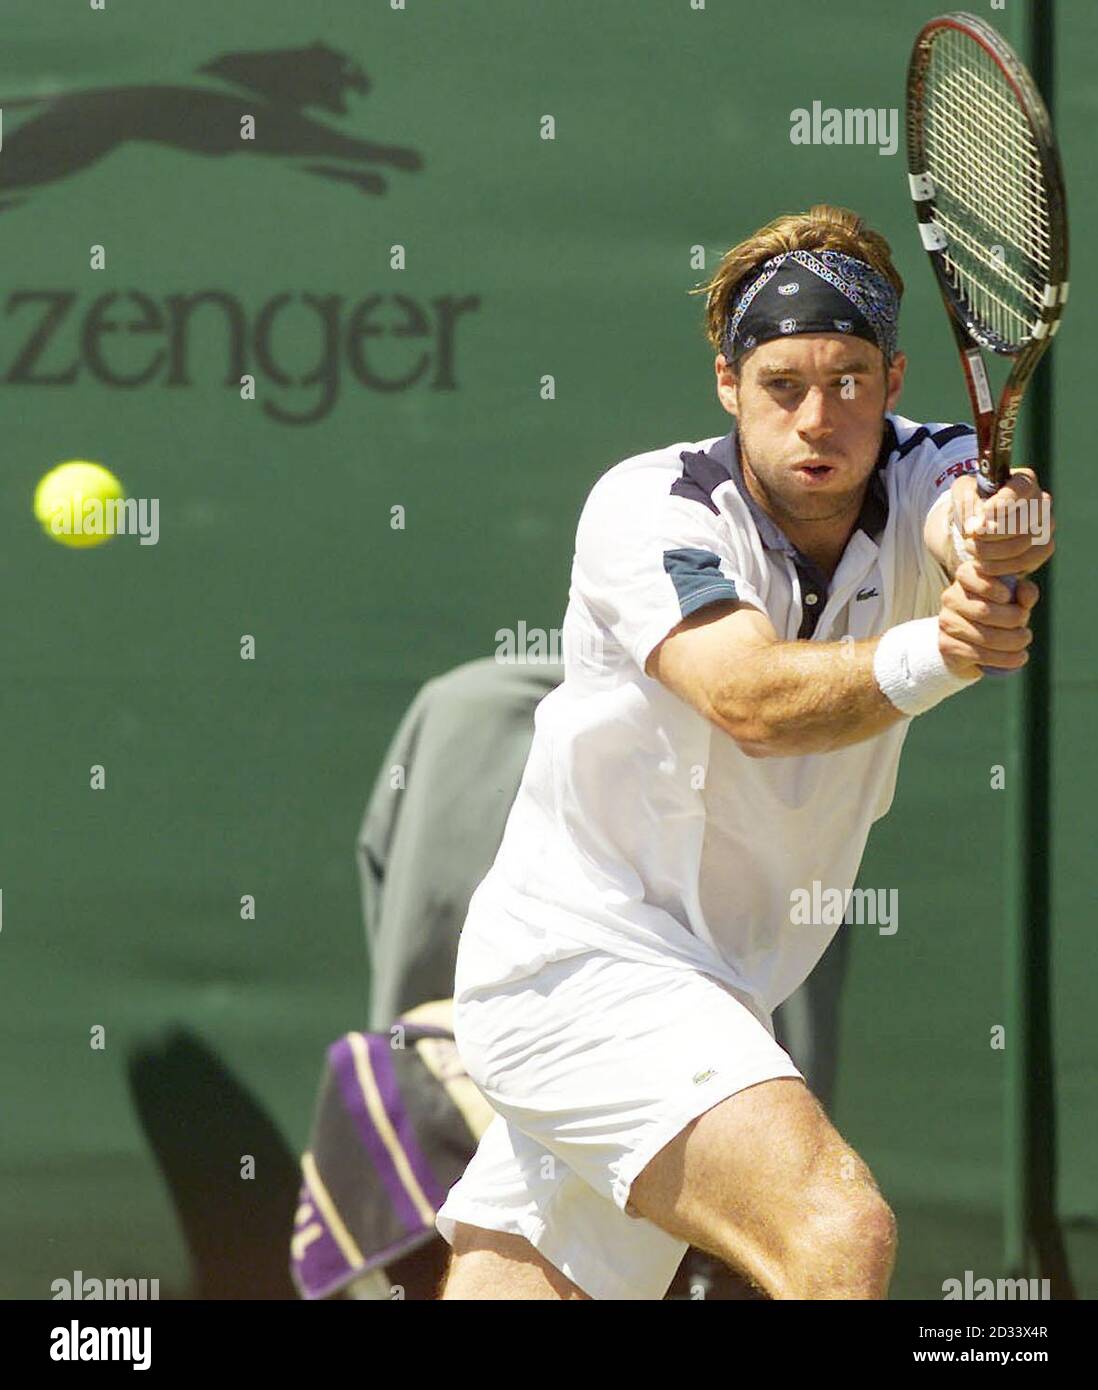 EDITORIAL USE ONLY, NO COMMERCIAL USE. Un-seeded Swiss tennis player George Bastl in action against seven times Wimbledon Champion Pete Sampras on Court Two at The All England Lawn Tennis Club. Stock Photo